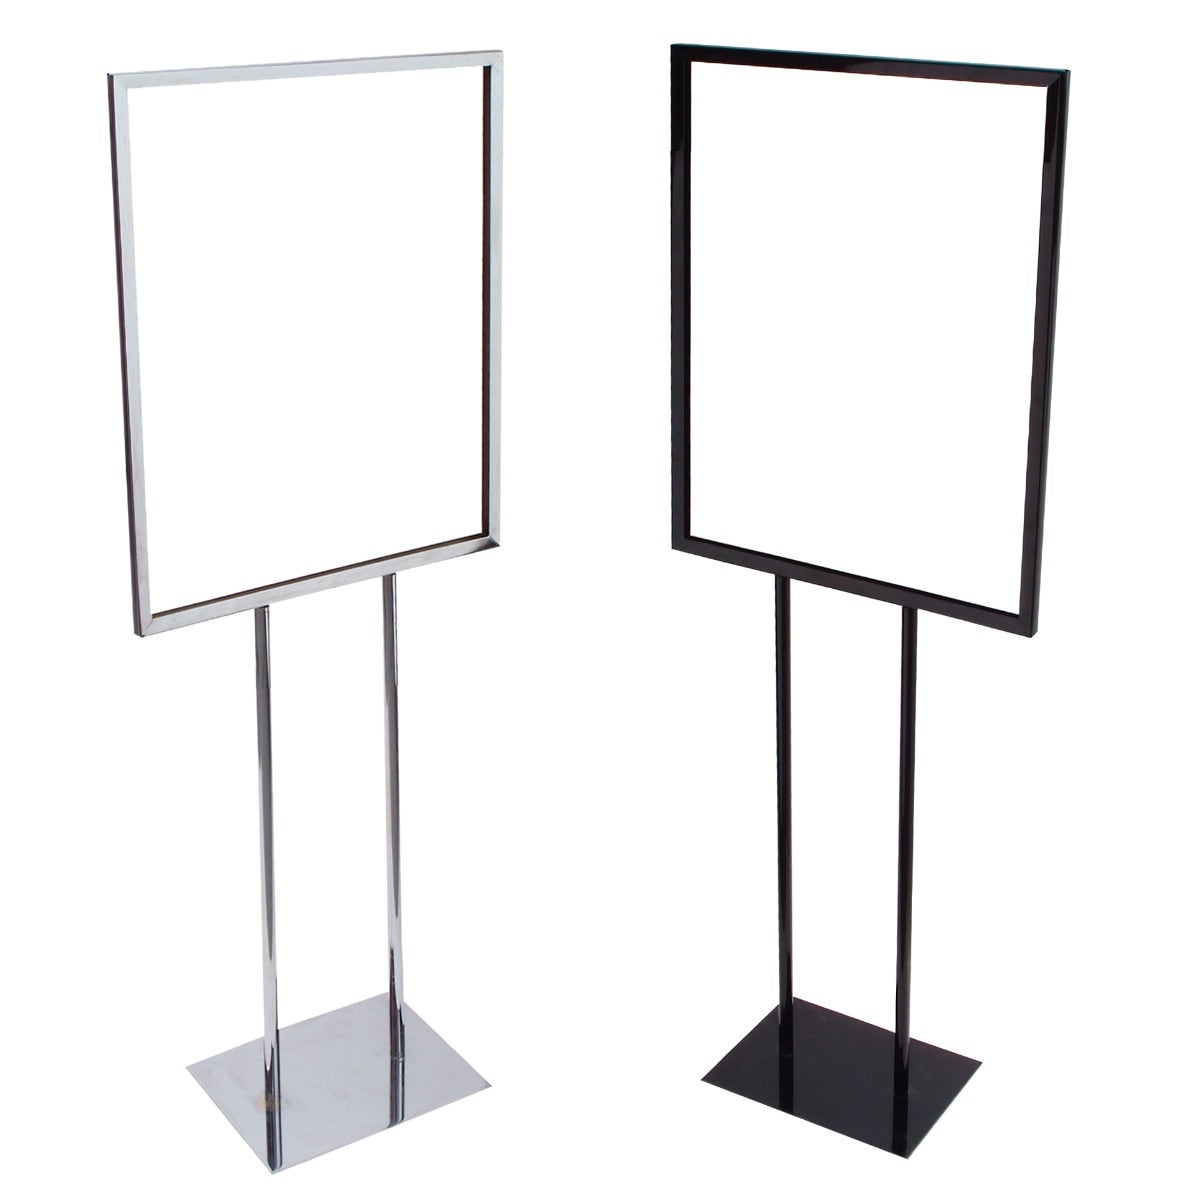 22" x 28" Frame Floor Standing Sign Holders With Round Tubing Supports